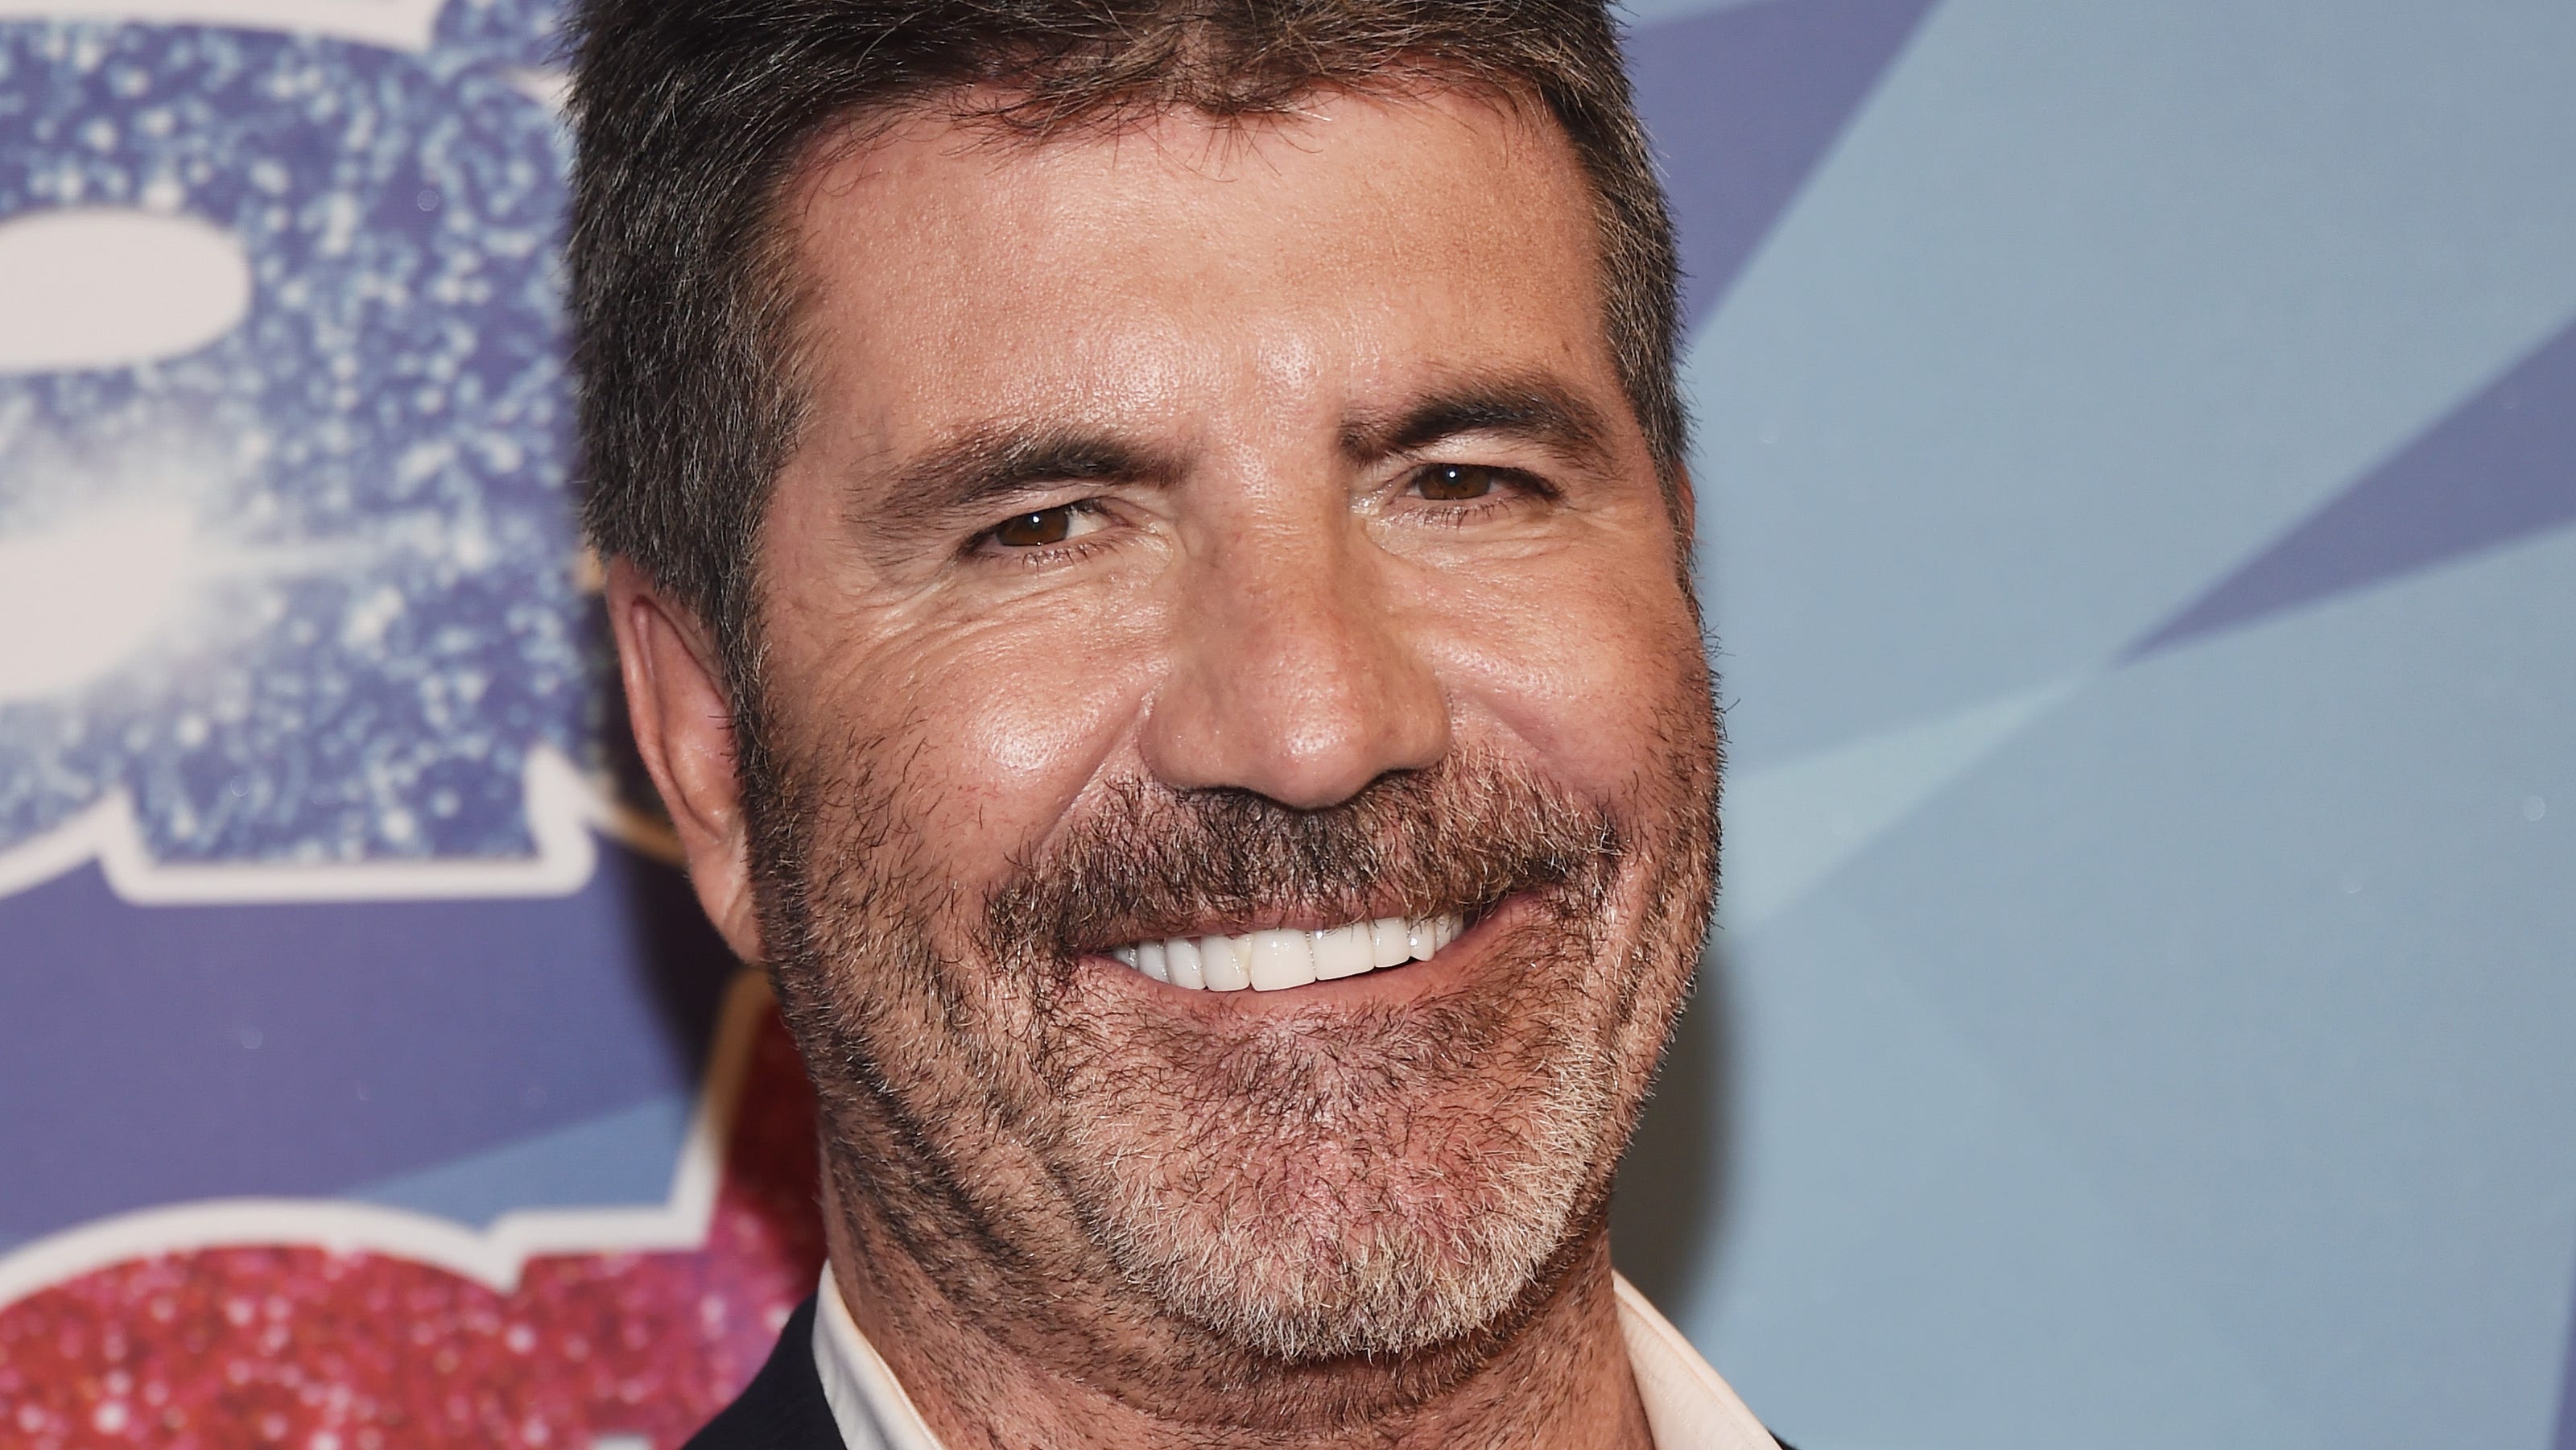 Simon Cowell Says Hes Lost 20 Pounds On Vegan Diet But Craves Pizza 